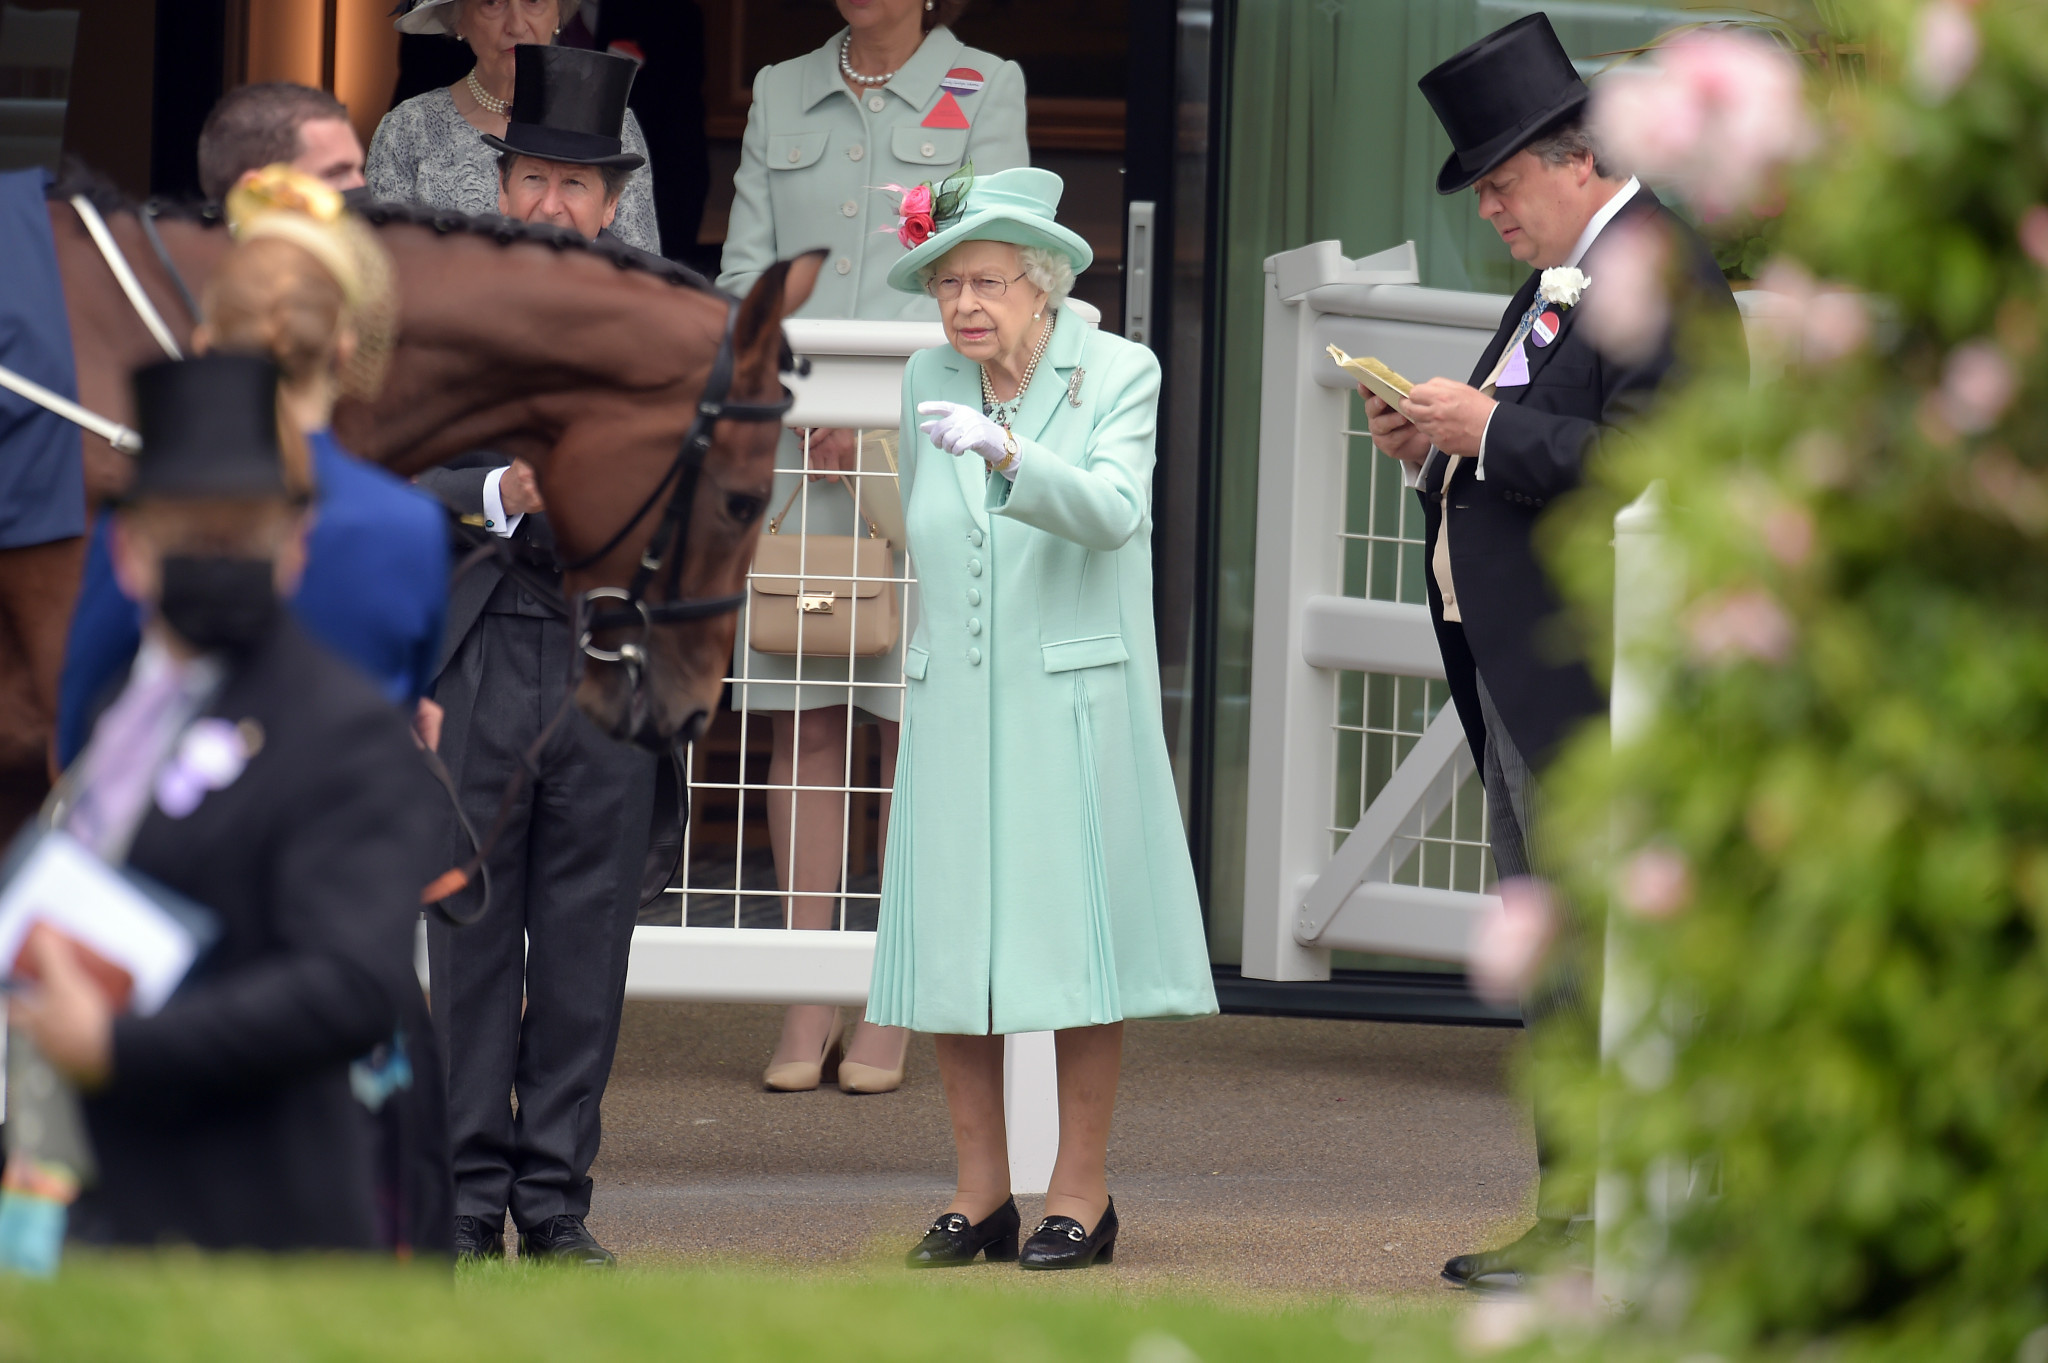 Queen Elizabeth II was a keen fan of horse racing and regularly attended major meetings in Britain during his reign, including Royal Ascot ©Getty Images